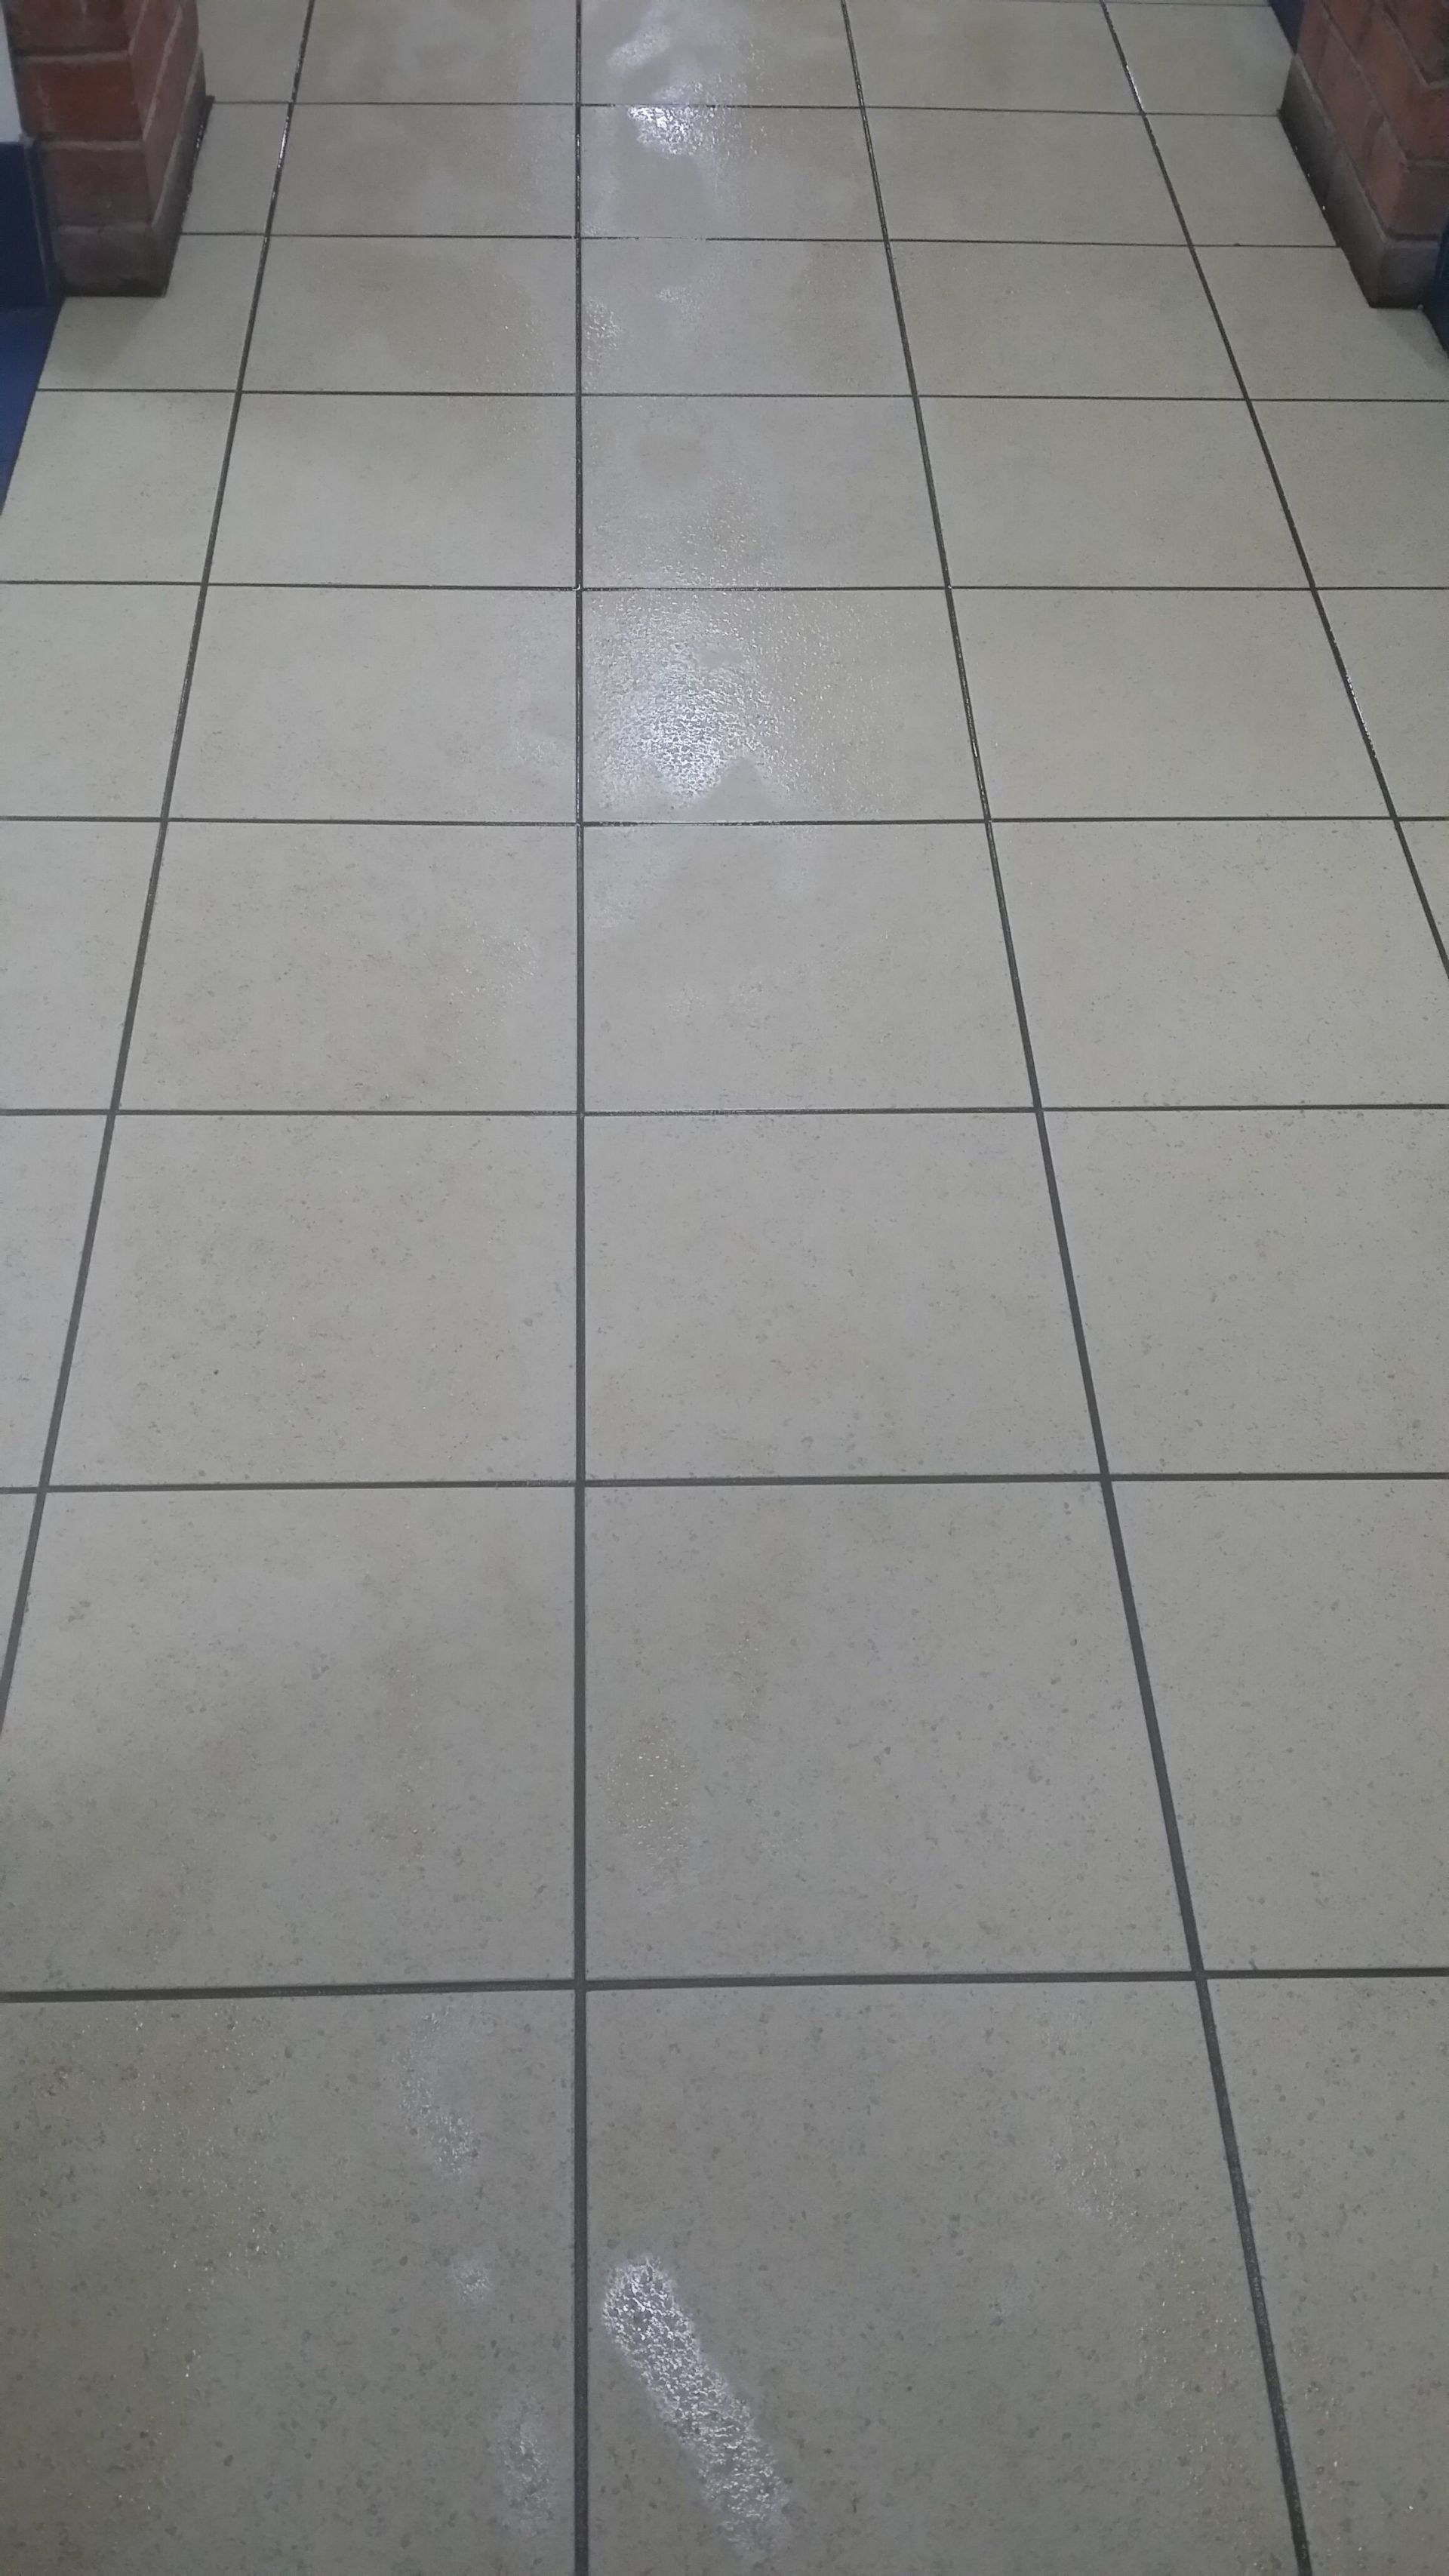 Swimming pool stone floor after cleaning